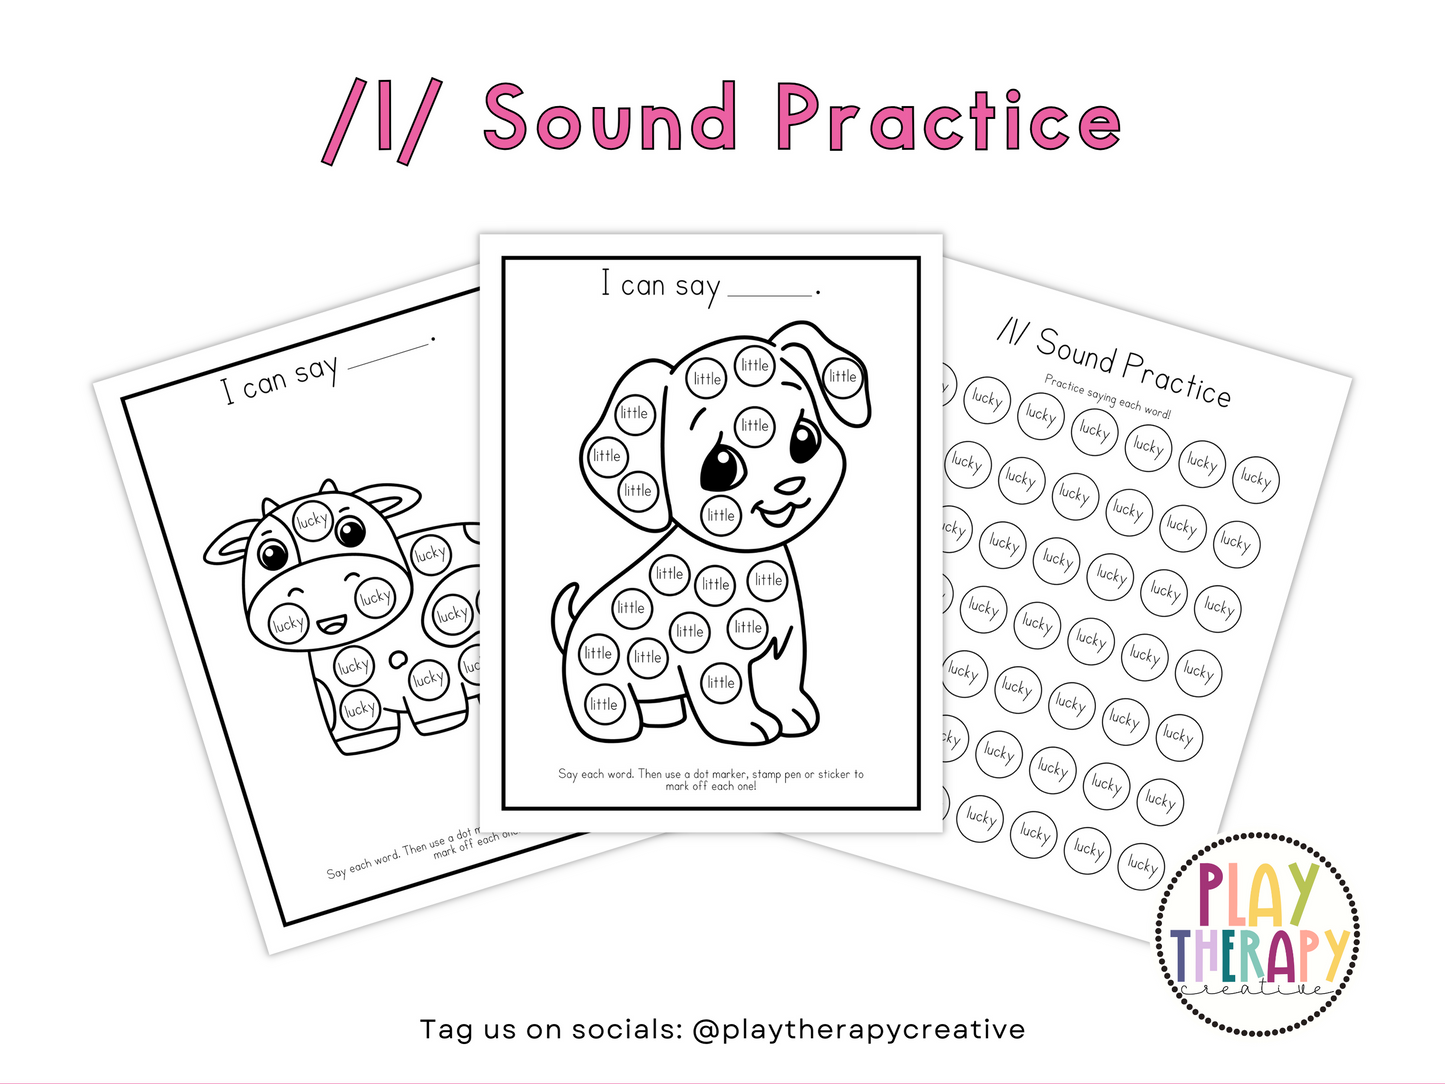 Dot Marker Speech Sound Practice Coloring Pages | /l/ Sound Words